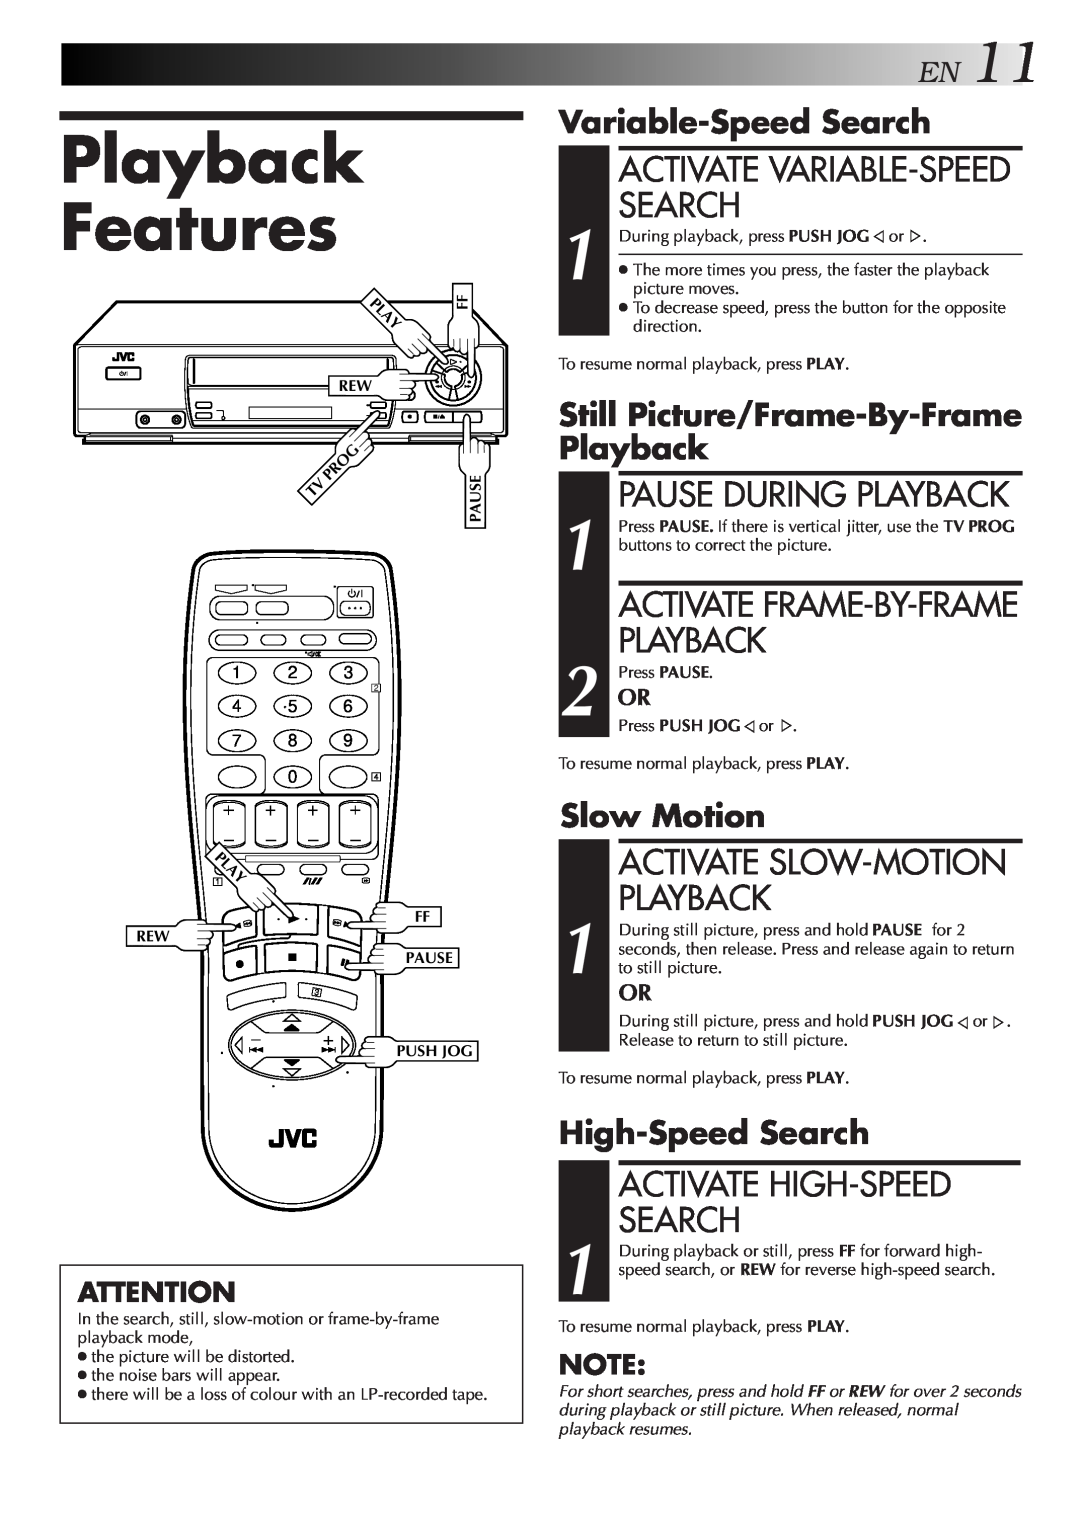 JVC HR-J455EA Playback Features, EN11, Activate Slow-Motion Playback, Activate High-Speed Search, Slow Motion 